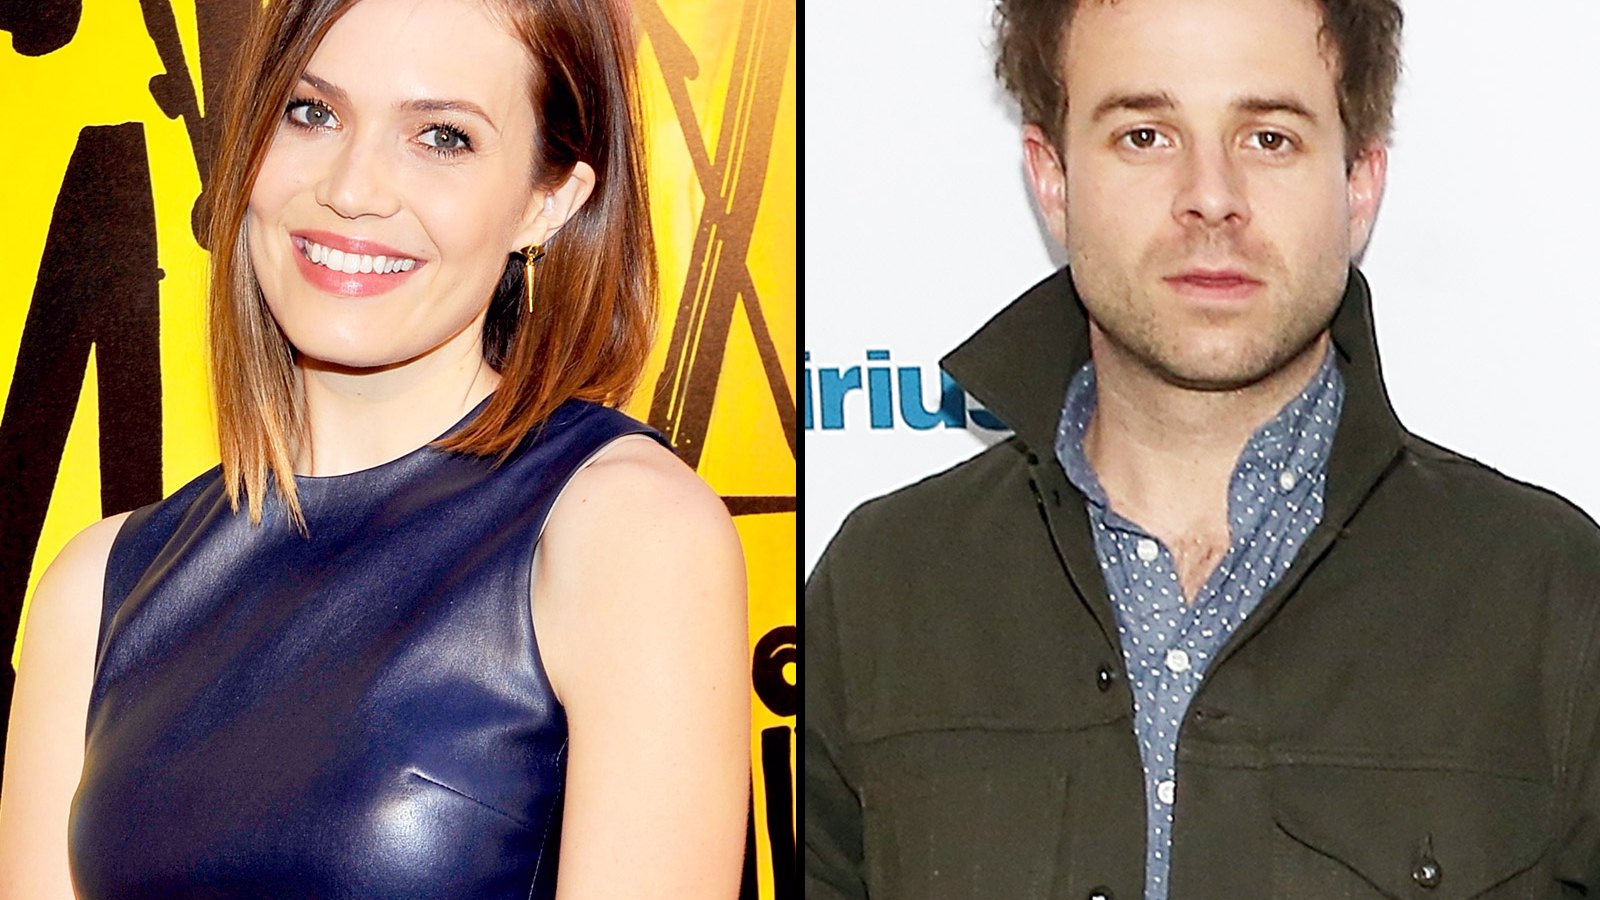 Mandy Moore and Taylor Goldsmith